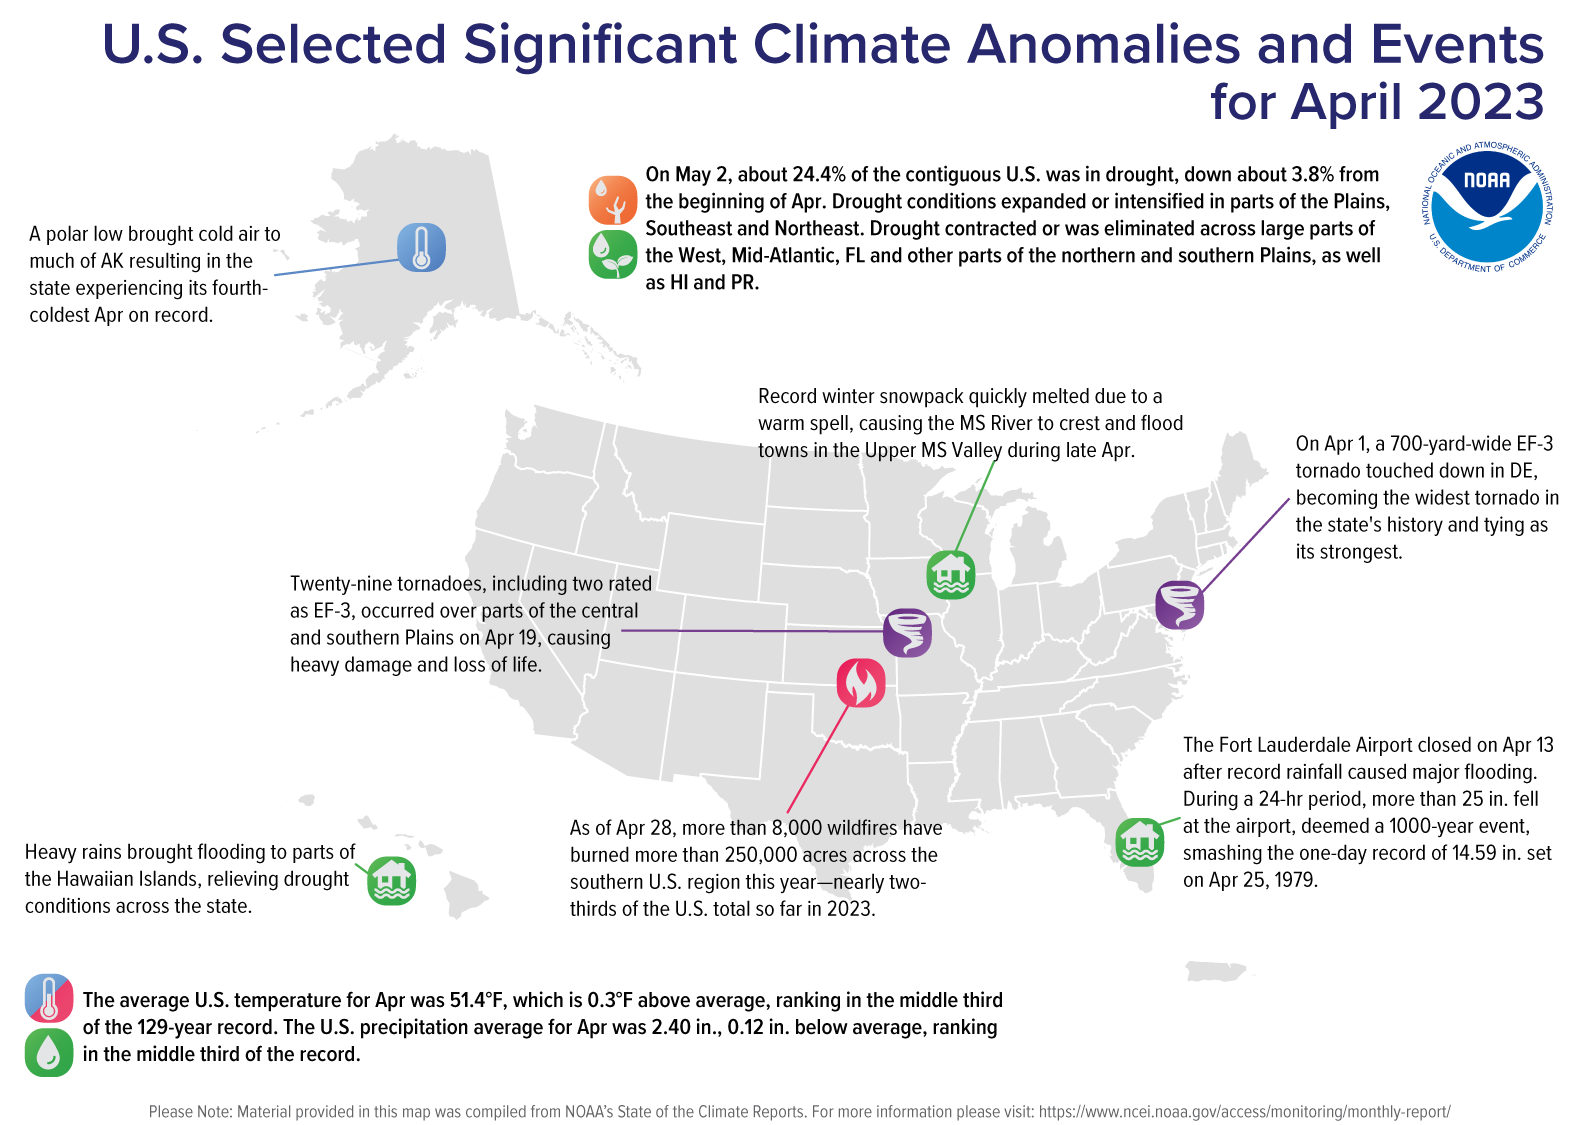 A map of the United States plotted with significant climate events that occurred during April 2023. Please see the story below as well as the full climate report highlights at http://bit.ly/USClimate202304.